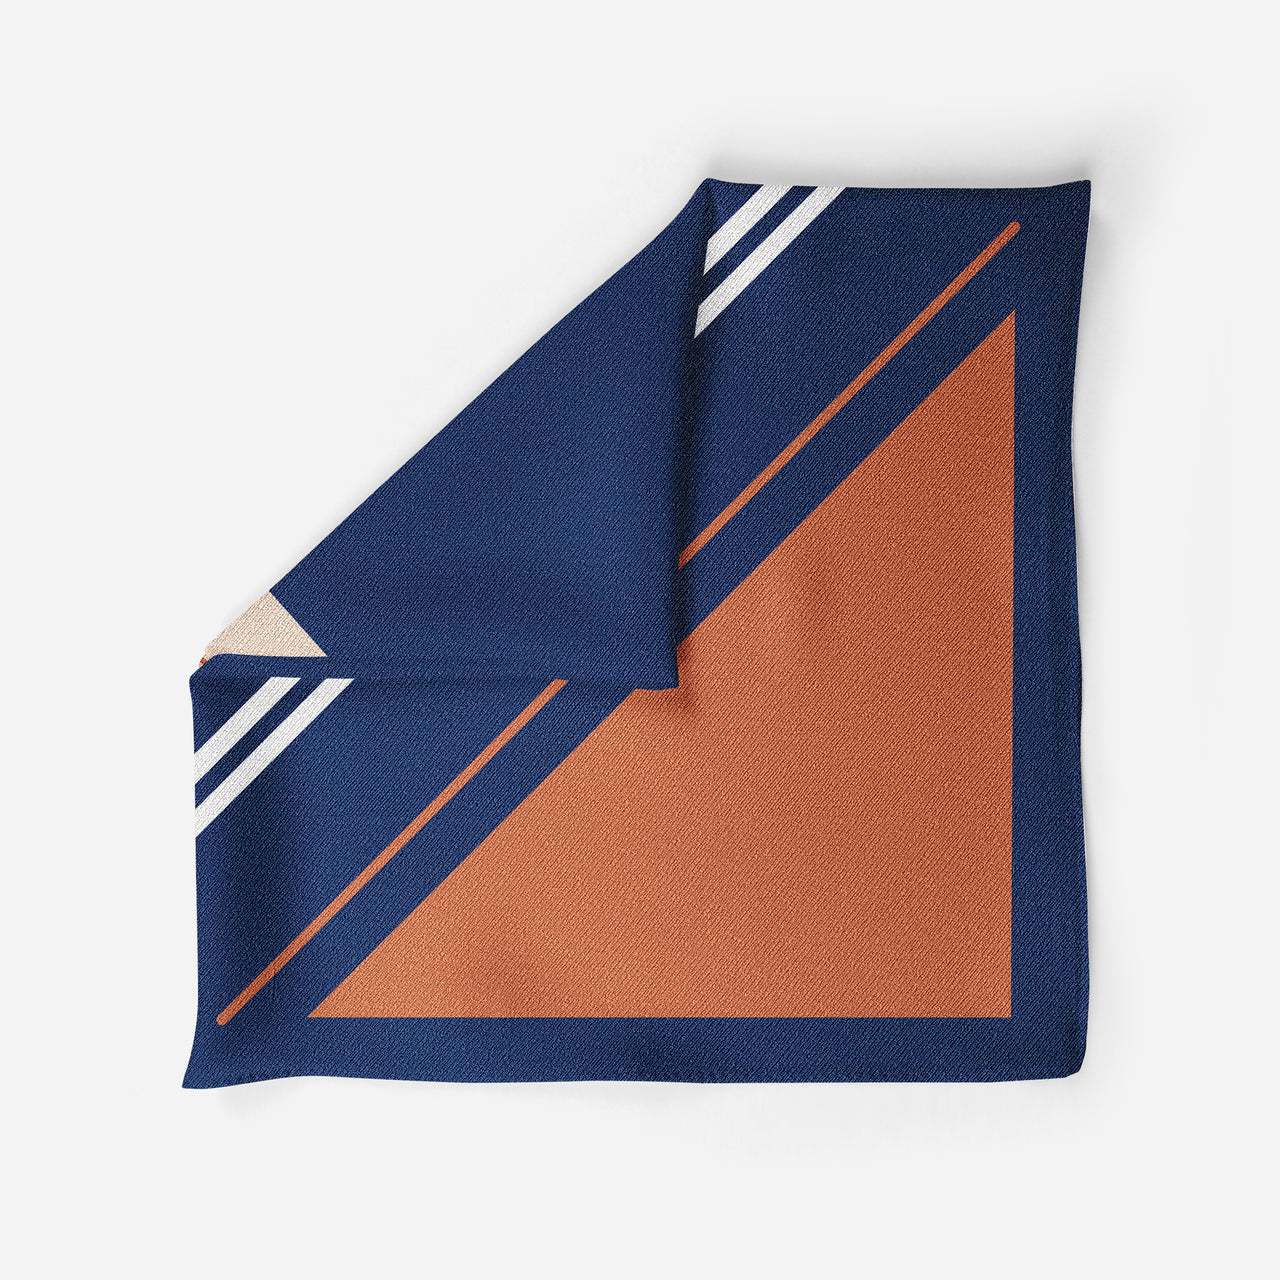 Pocket squares in various colors